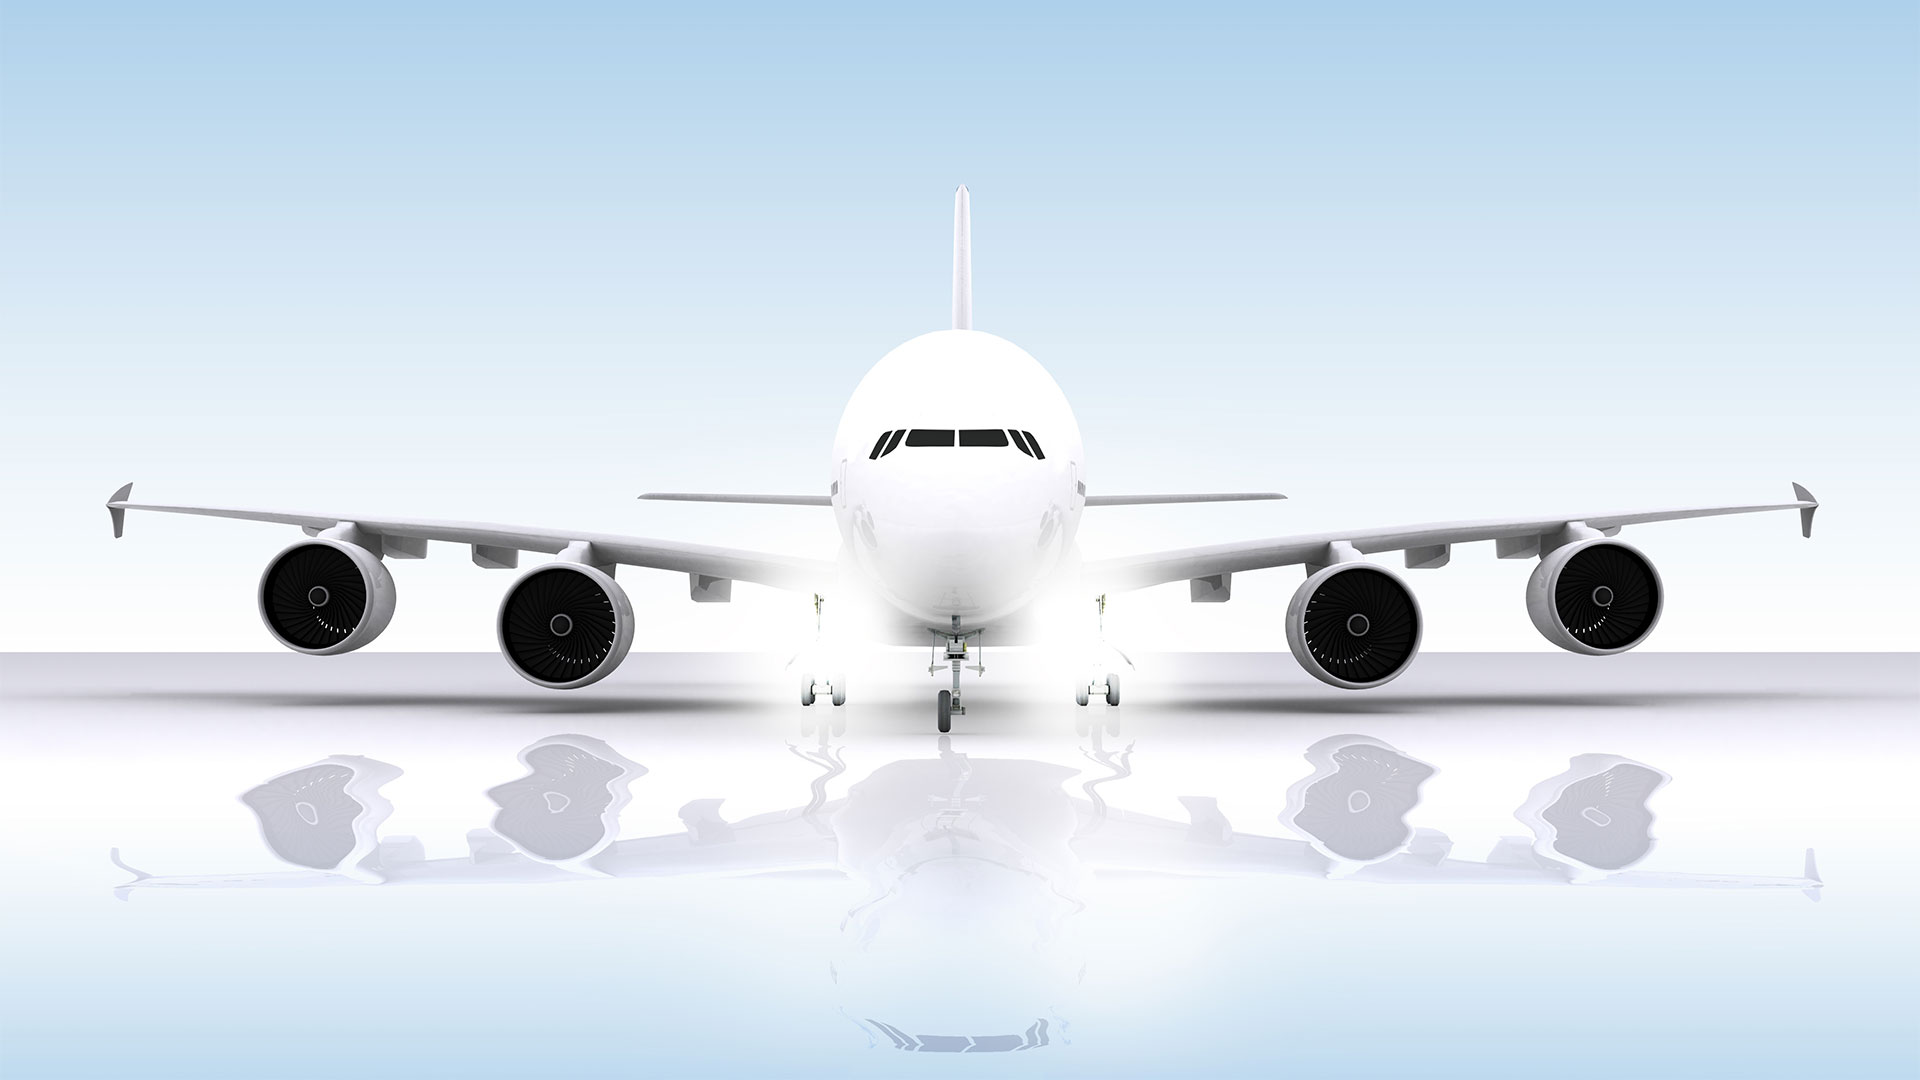 Free Aircraft Background Images - Wallpapers - Airplanes